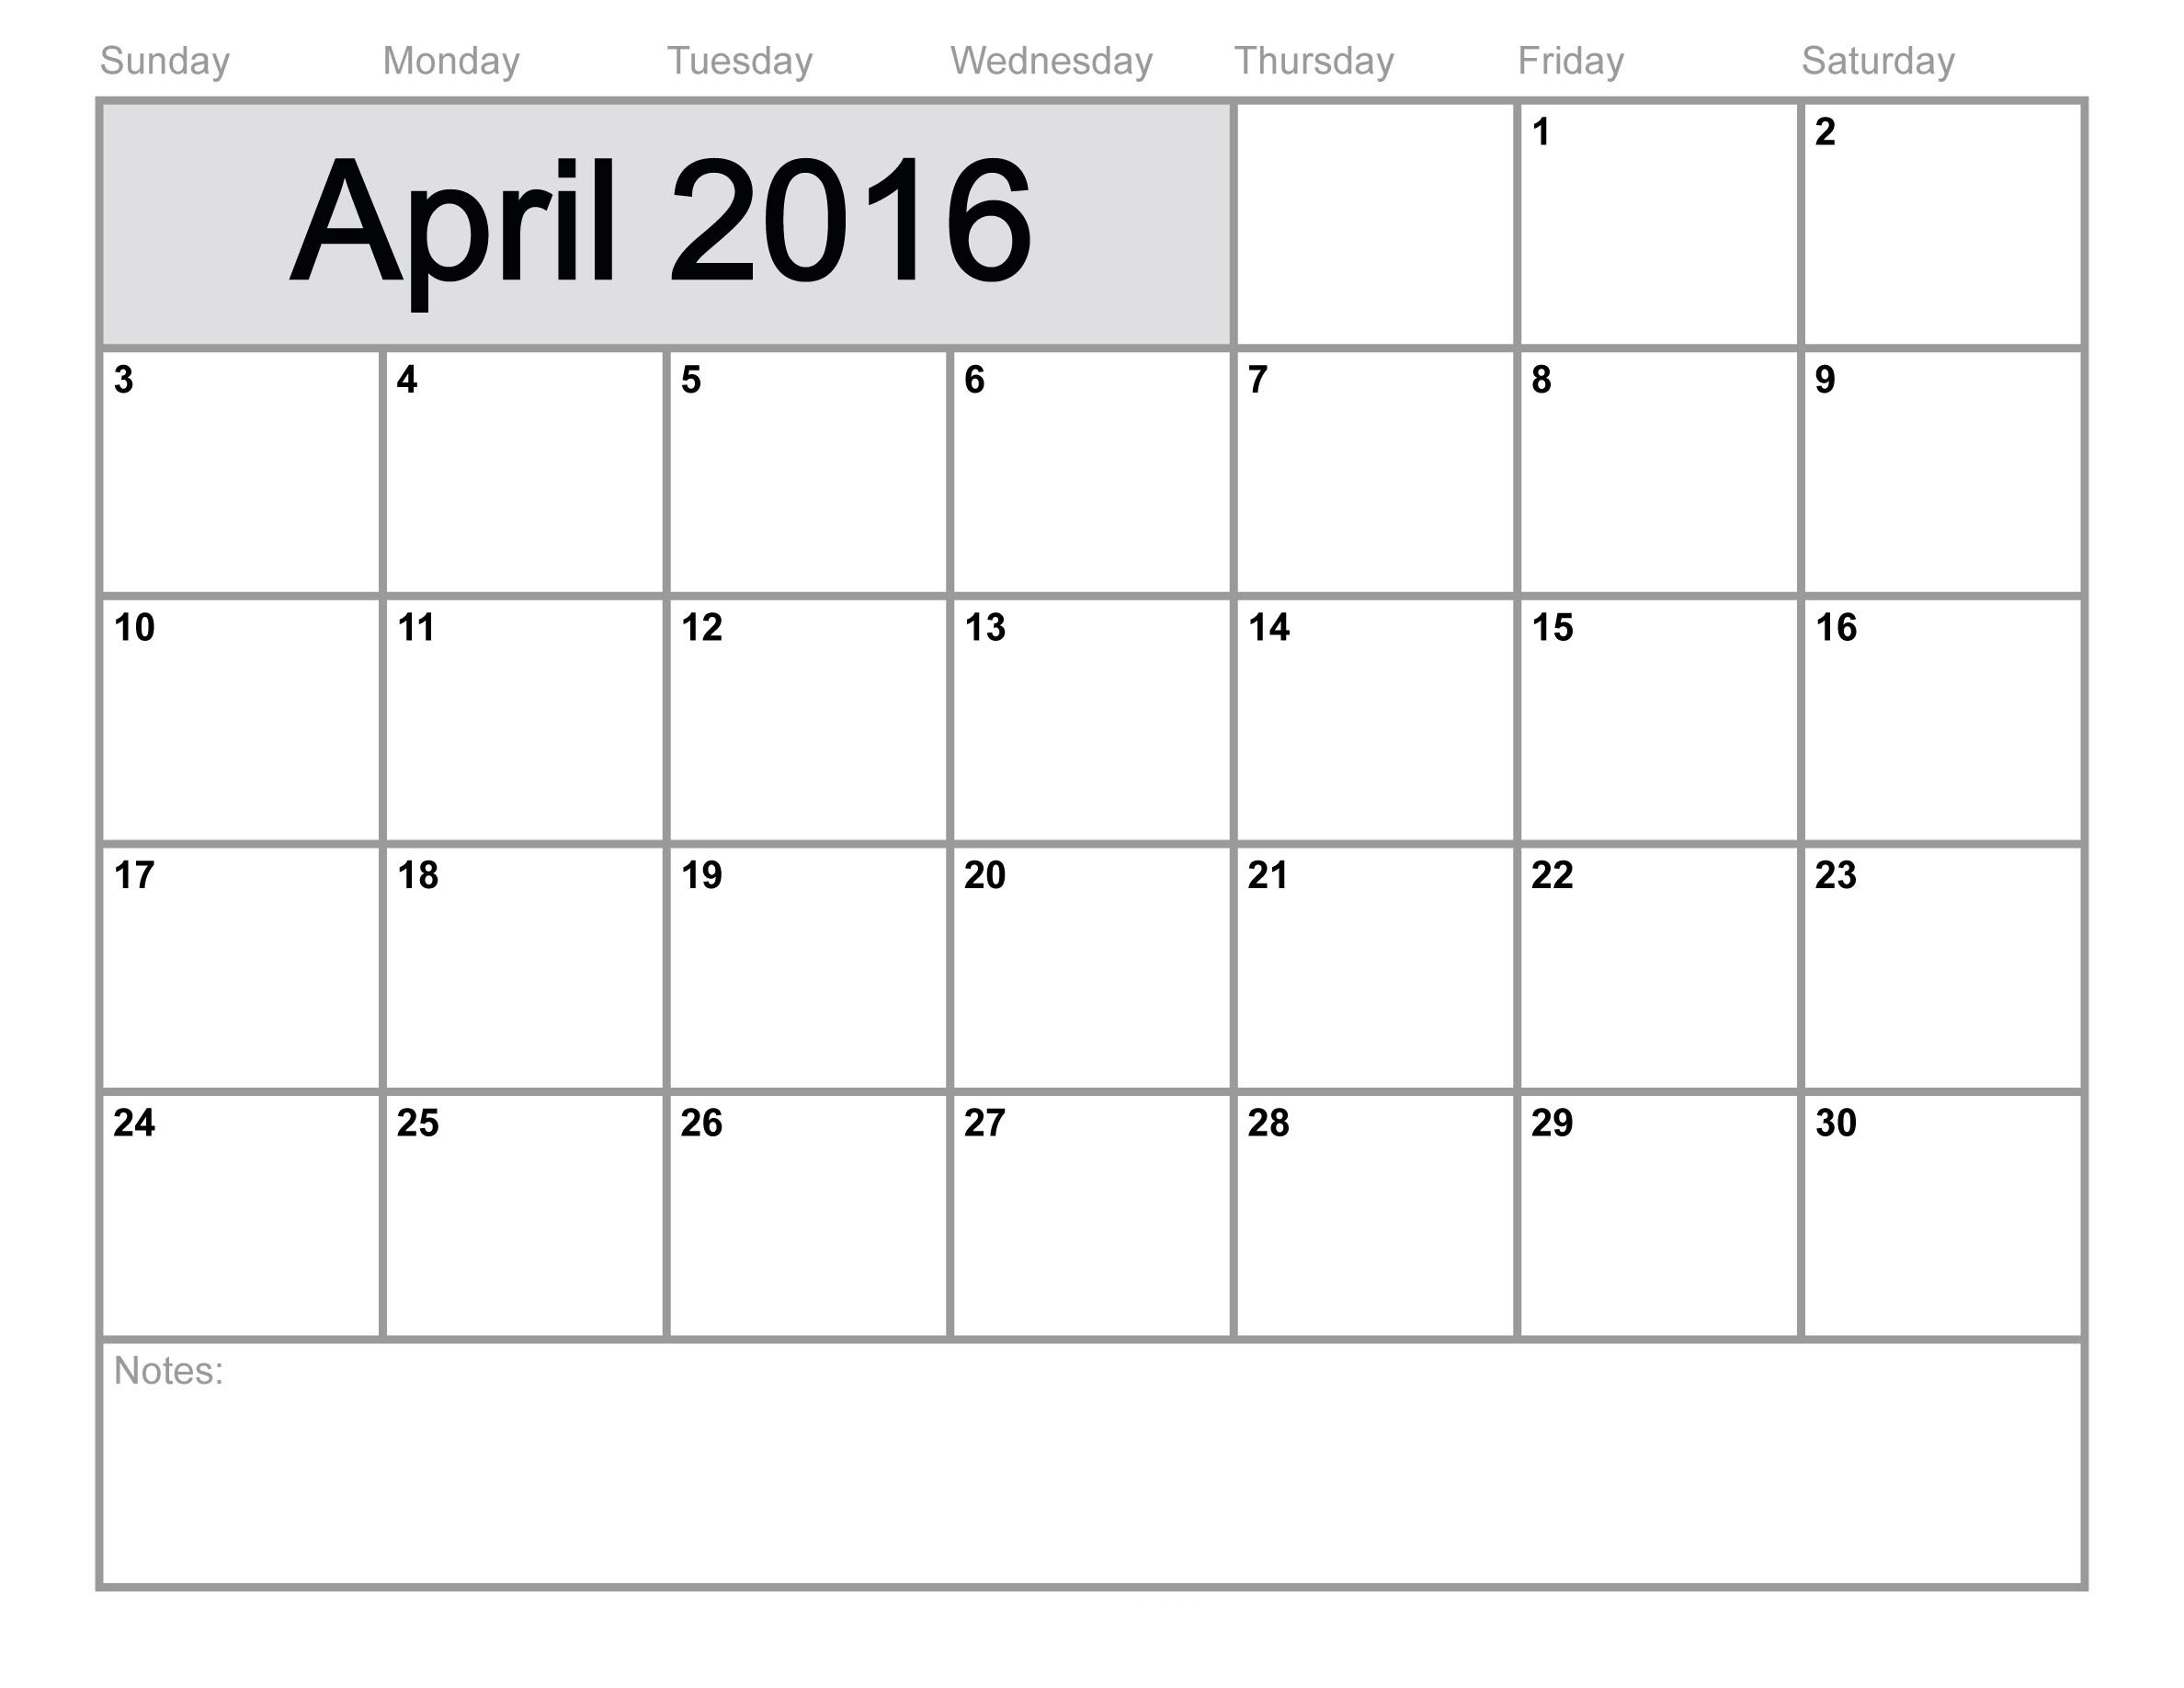 Blank Monthly Calendar Sun-Sat Color Free No Dates Download